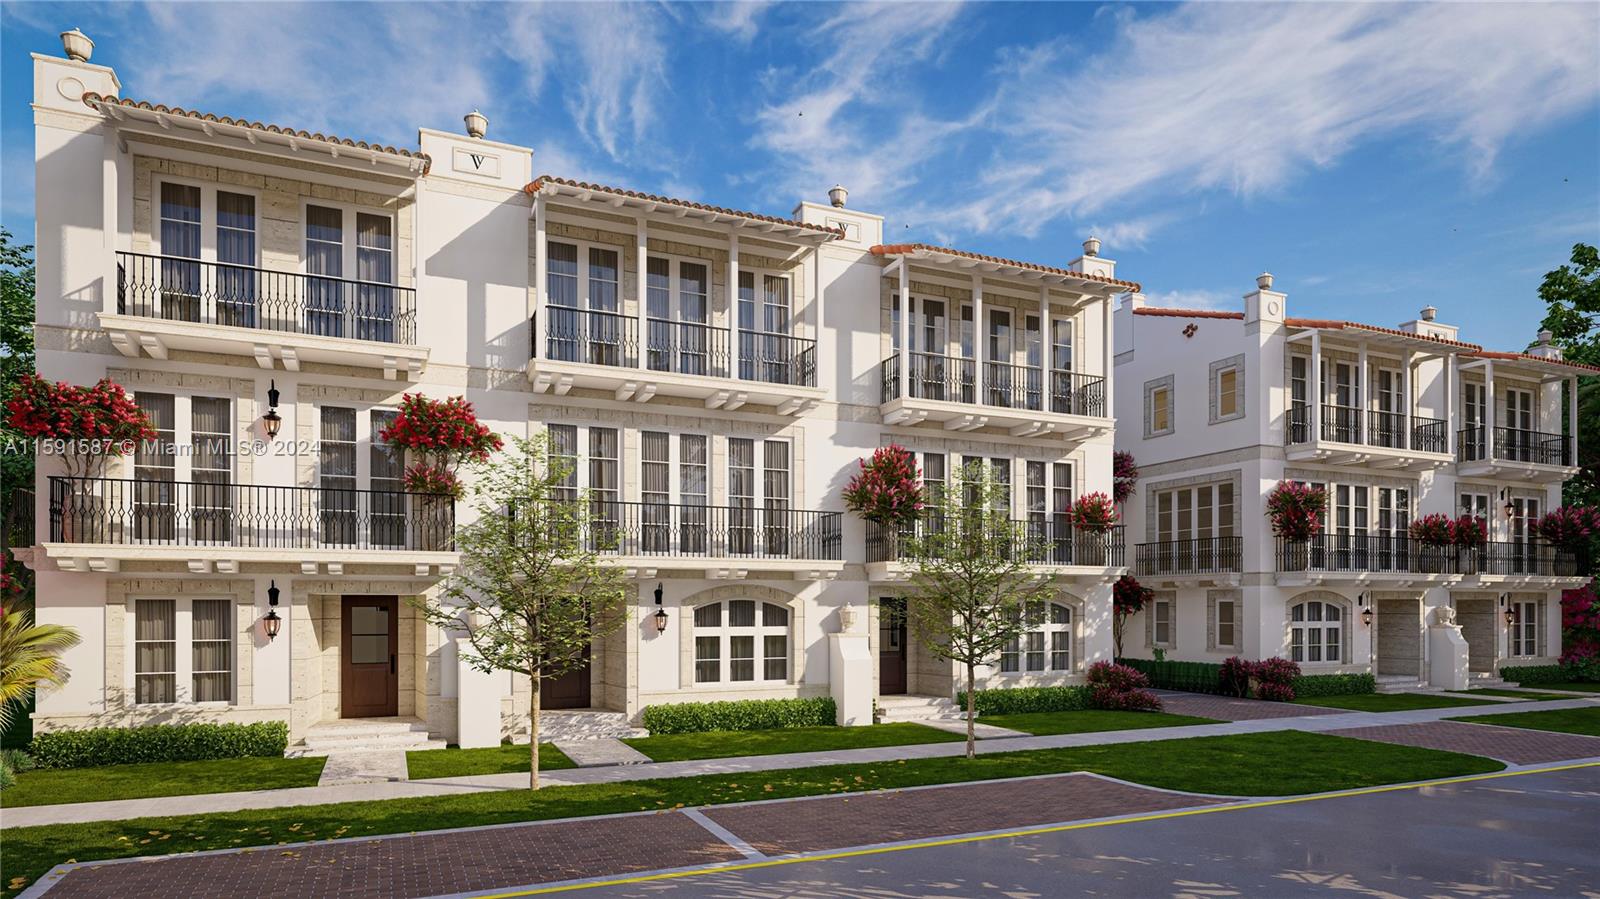 Via Veneto, a limited collection of 10 bespoke 3 story townhomes, each encompassing 5,300 - 5,500 sq ft of living space with 4 bedrooms and 4.5 bathrooms. Nestled in the heart of Coral Gables, the residences, meticulously crafted by the master builders at The Calta Group, feature a 4 car garage, 2 car carport, and an elevator. The architectural elegance by Nelson de Leon, complemented by the interior refinement of Sensi Casa showcase 3 levels, high end finishes and appliances, presenting a harmonious blend of modern convenience with Mediterranean charm. Covered terraces and balconies usher in natural light and provide views of the Venetian Pool and The Biltmore Hotel. Located at the prime intersection of Sevilla and Palermo, Via Veneto is a sanctuary of refined living in an iconic locale.